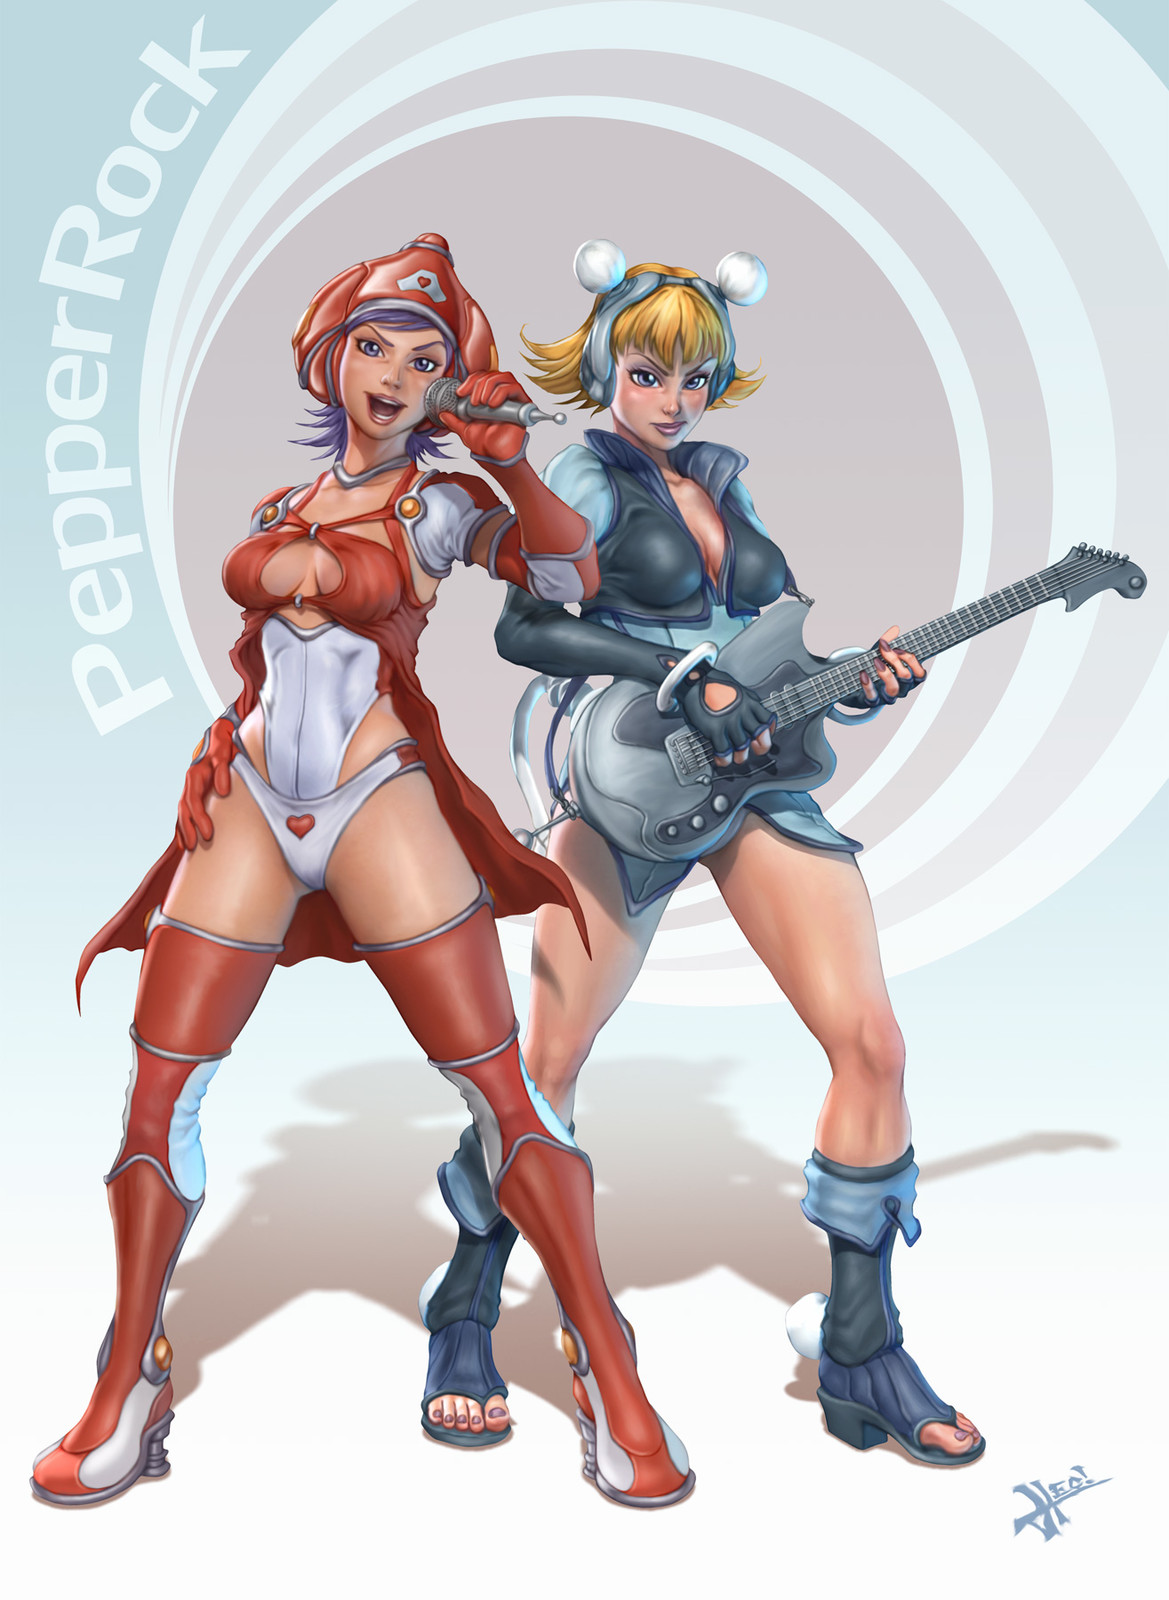 Pepper and Wanda, created by Stanley Lau (Artgerm) and Imaginary friends.